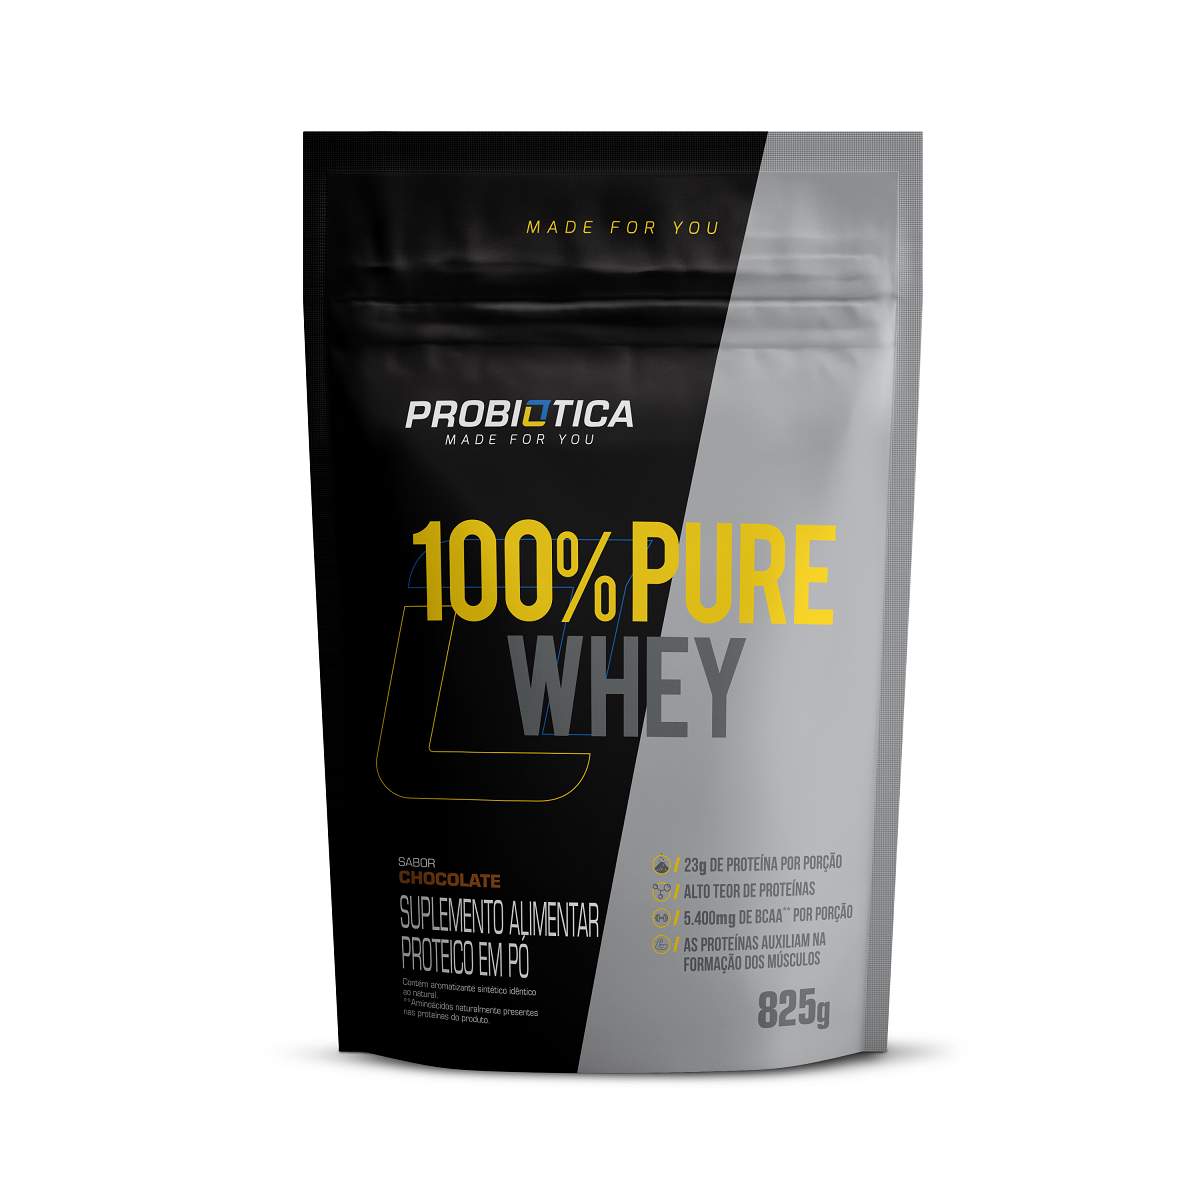 7896438210318 - 100% PURE WHEY CHOCOLATE POUCH 825G PROBIOTICA